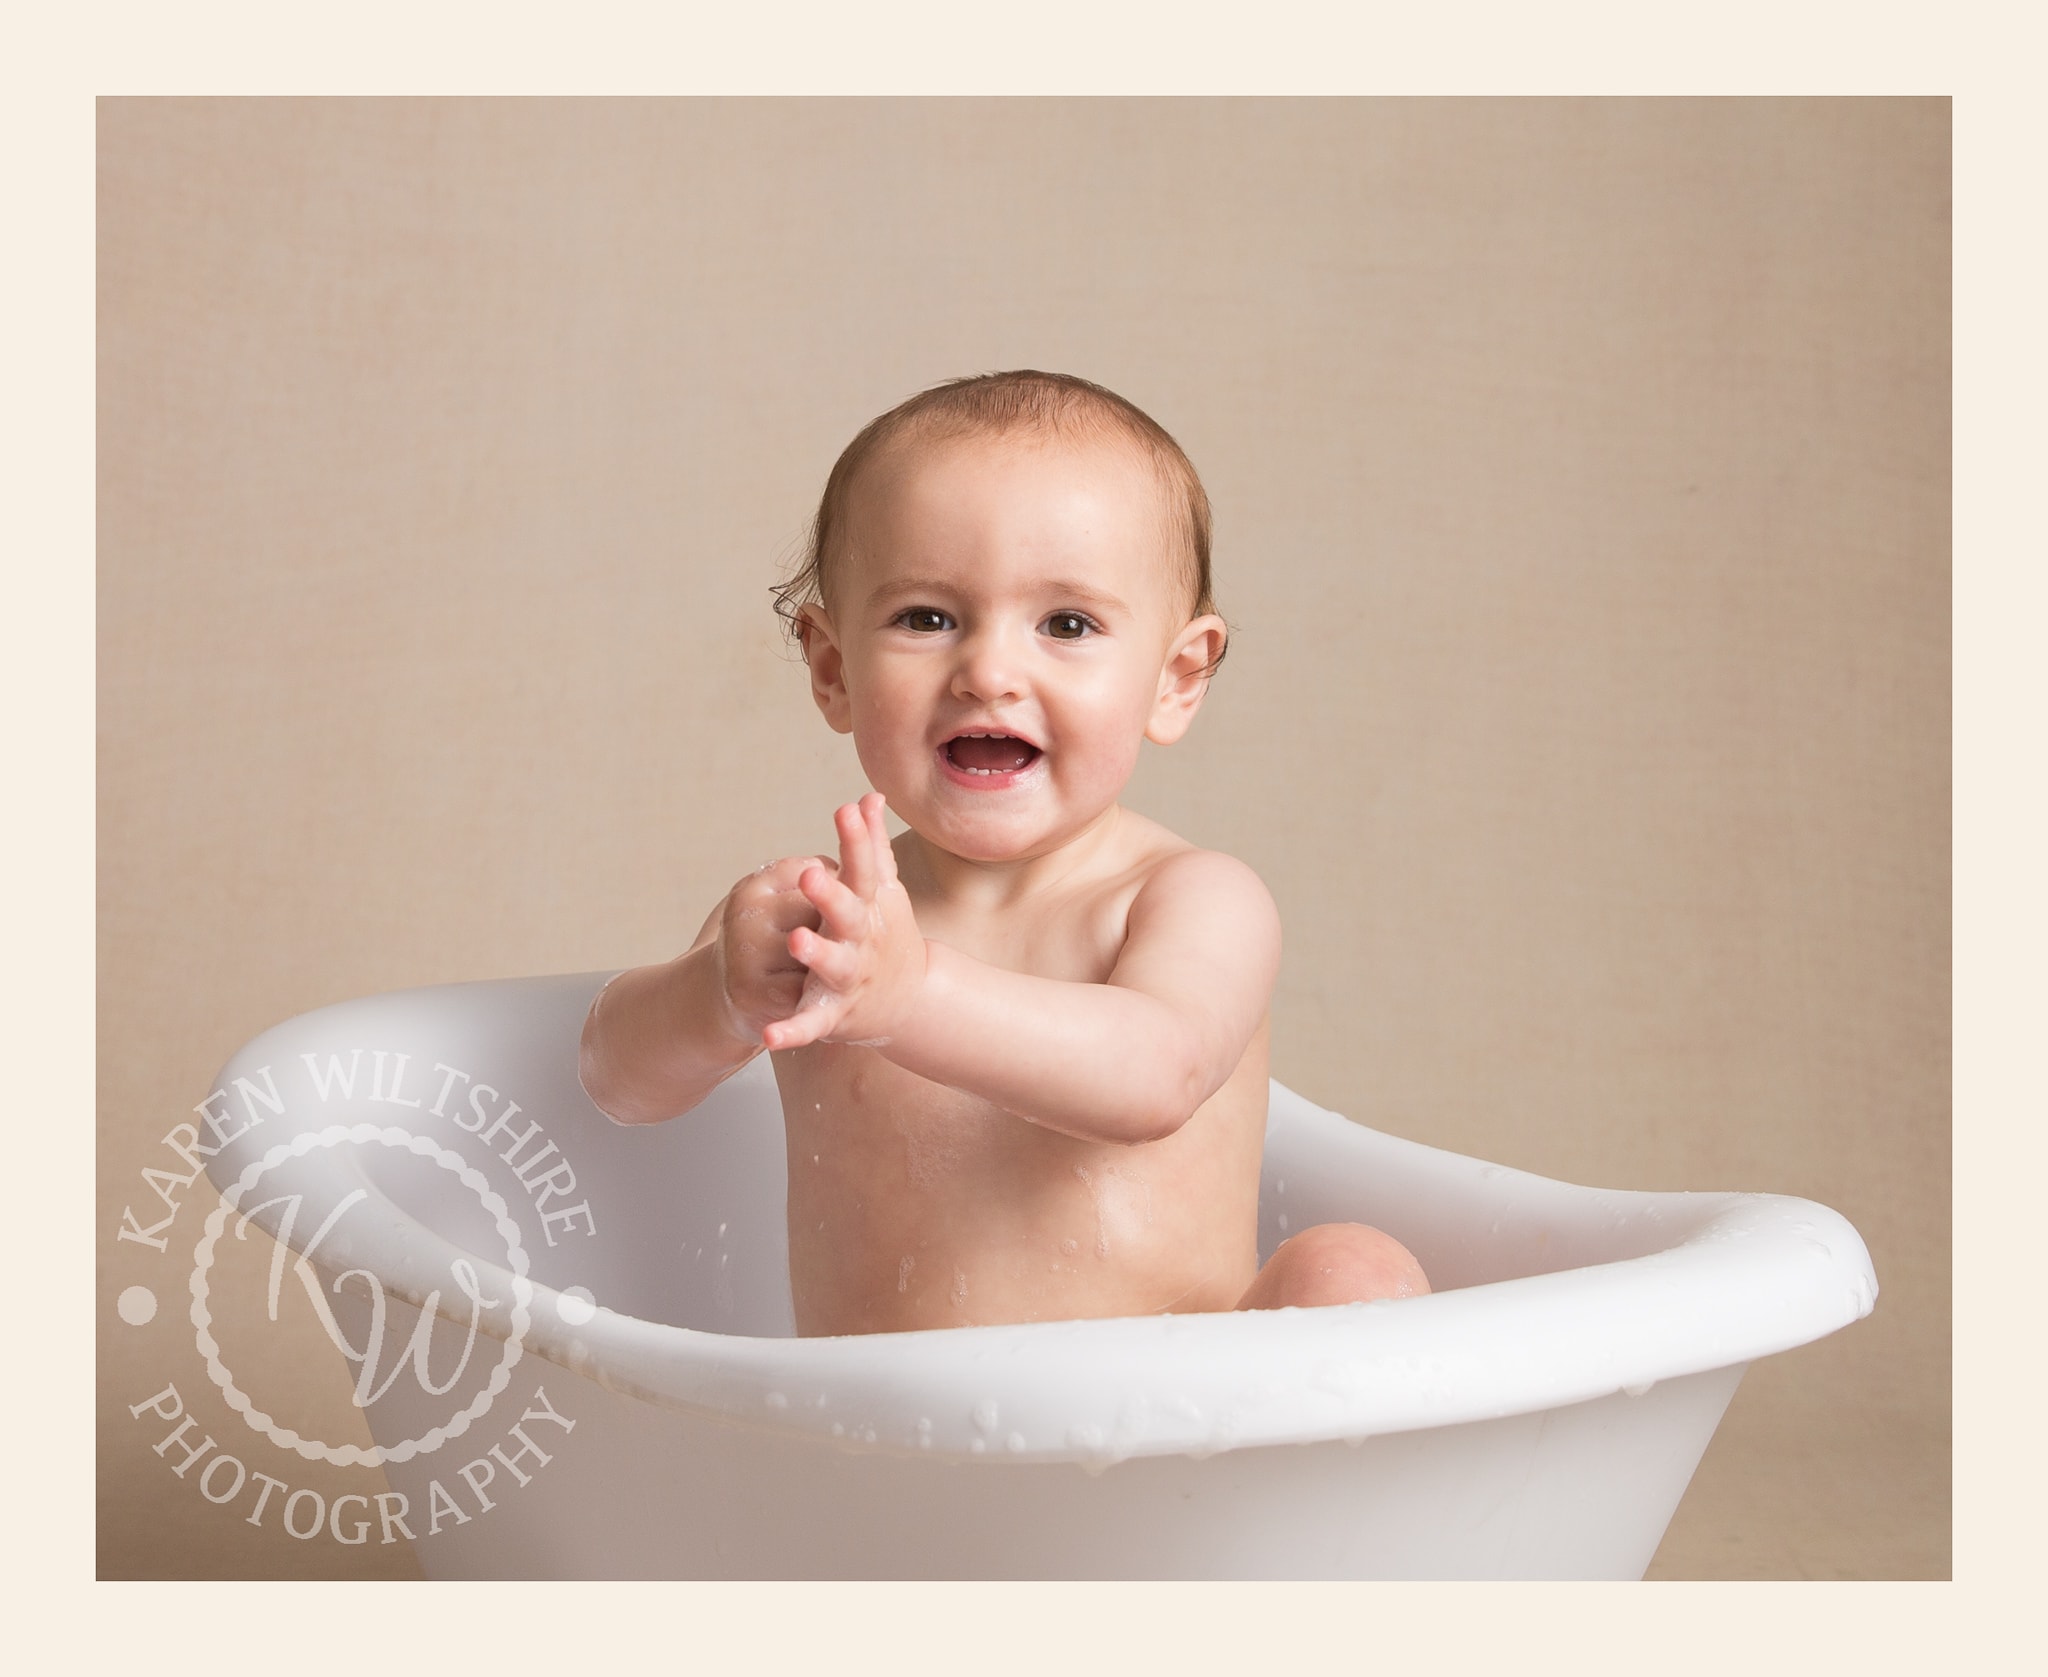 Baby clapping in bath